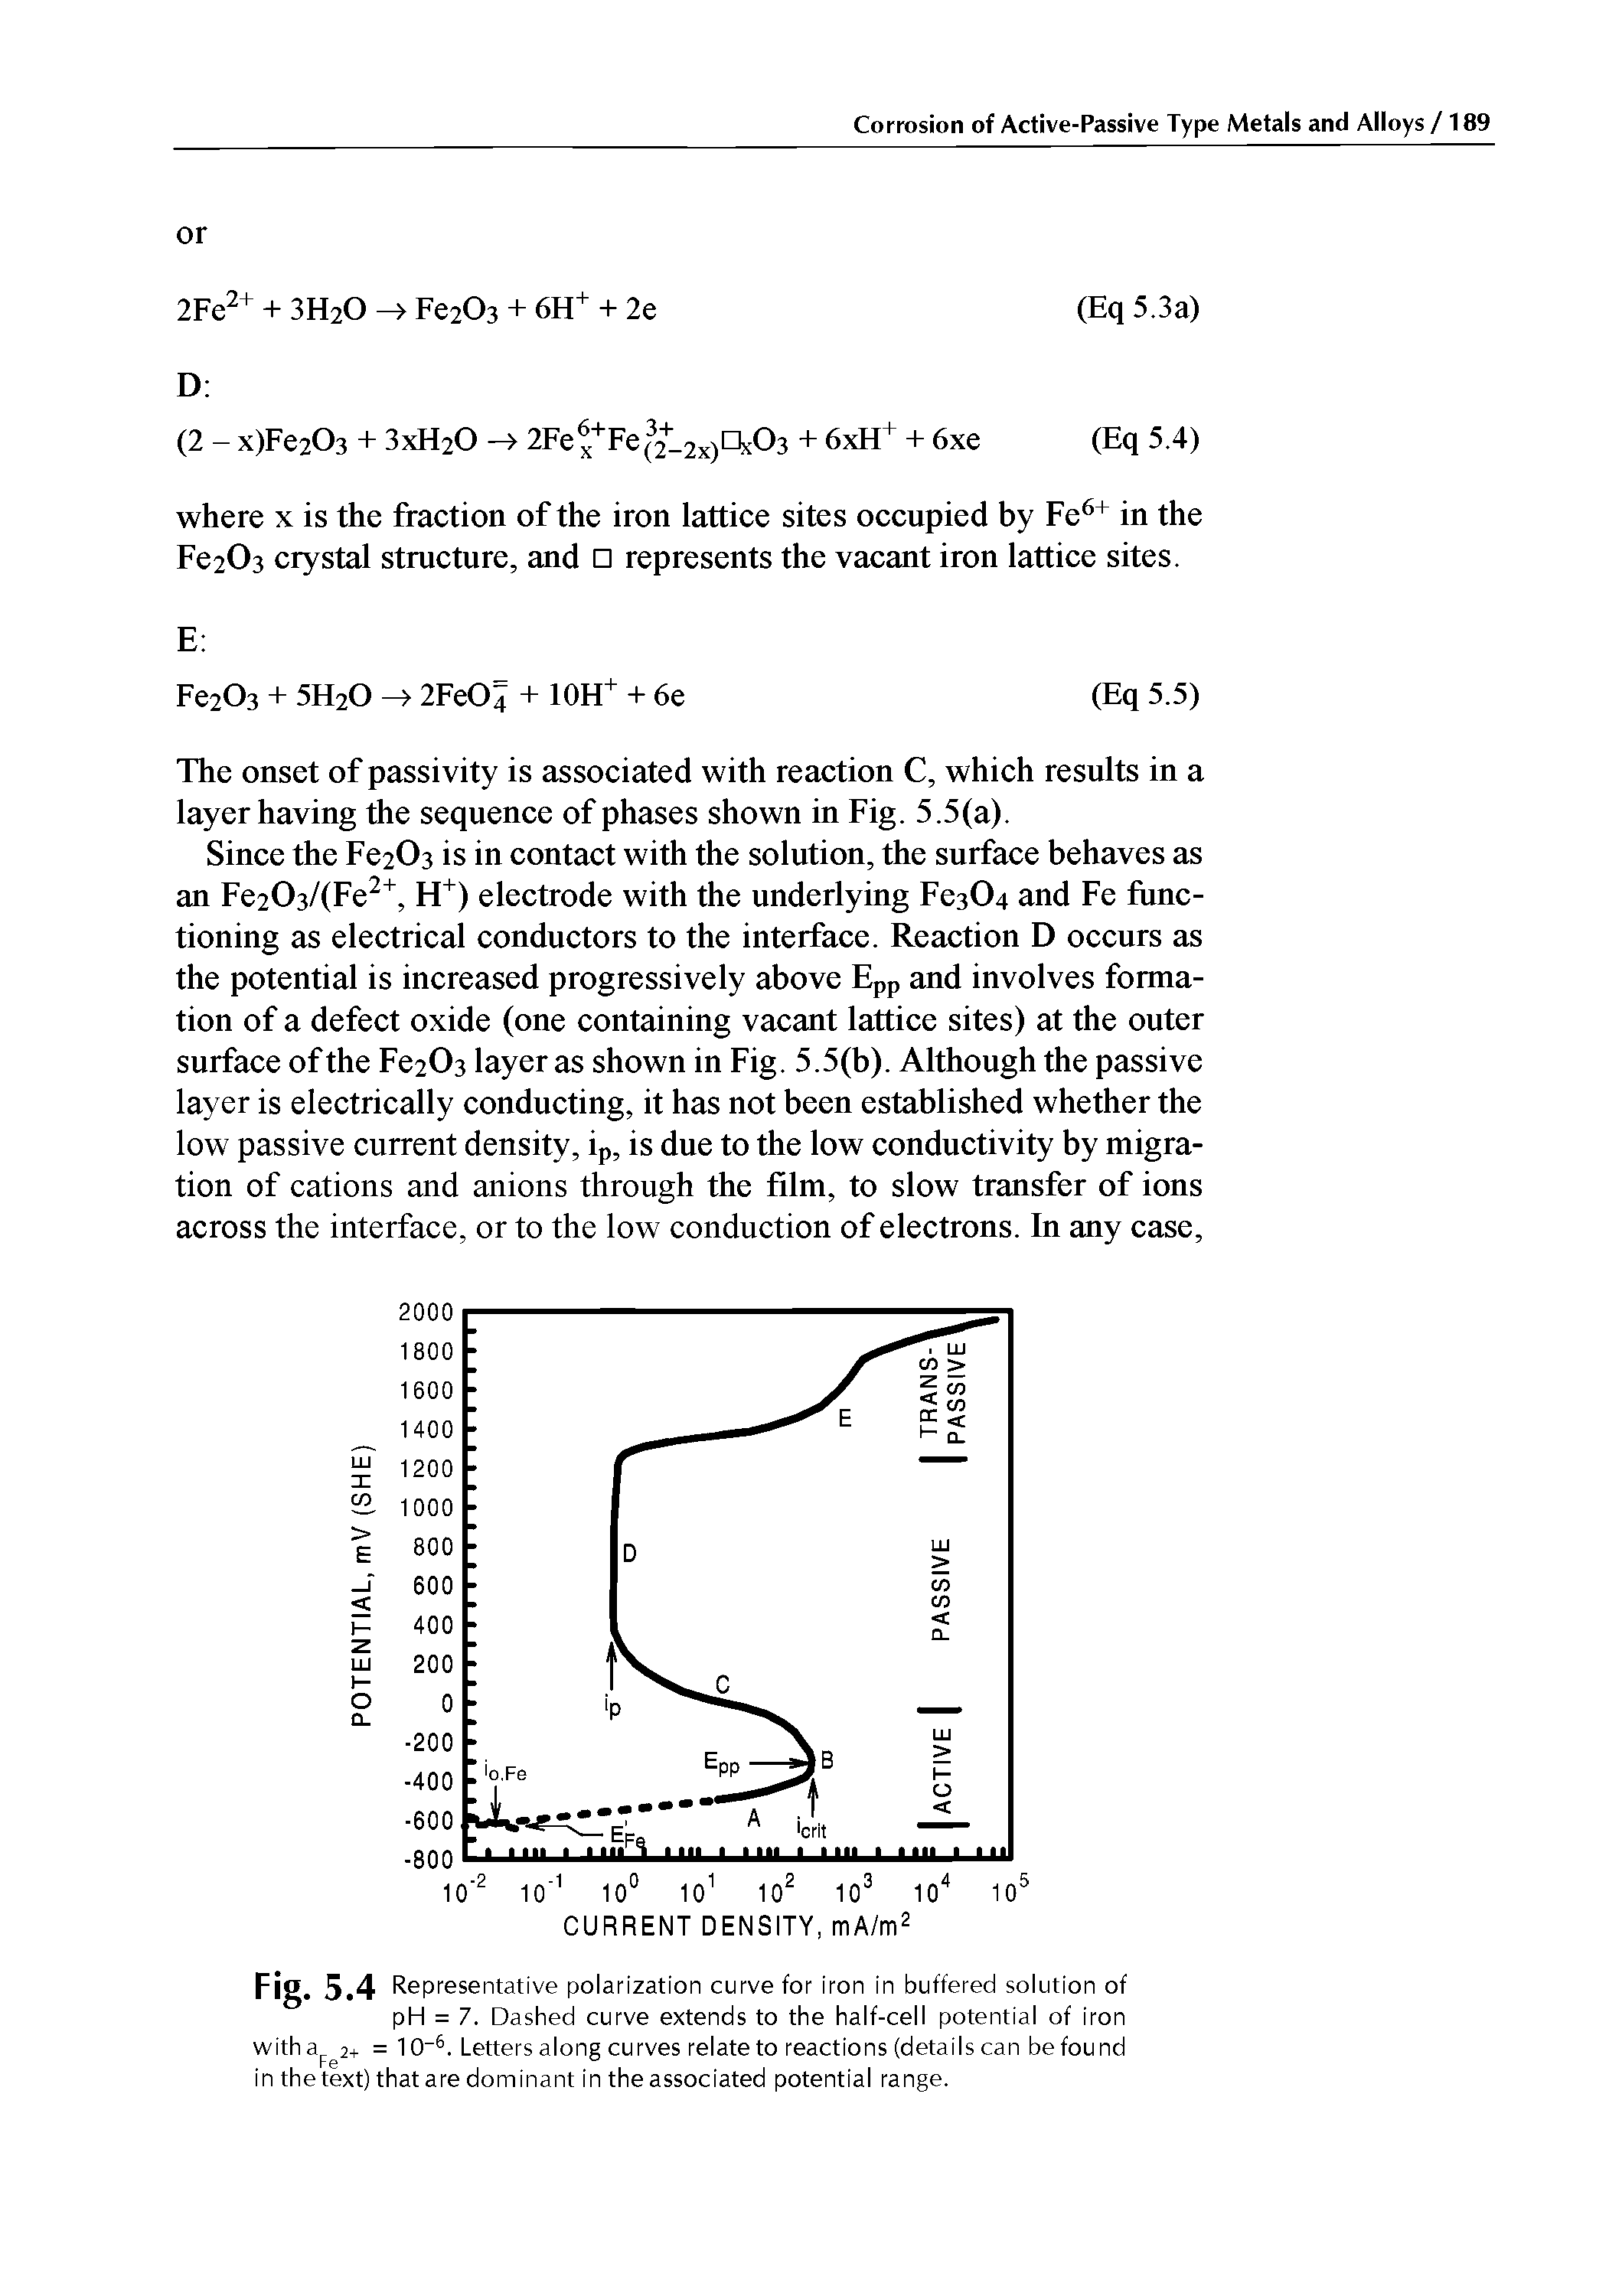 Fig. 5.4 Representative polarization curve for iron in buffered solution of pH = 7. Dashed curve extends to the half-cell potential of iron with ape2+ = 10-6. Letters along curves relate to reactions (details can be found in the text) that are dominant in the associated potential range.